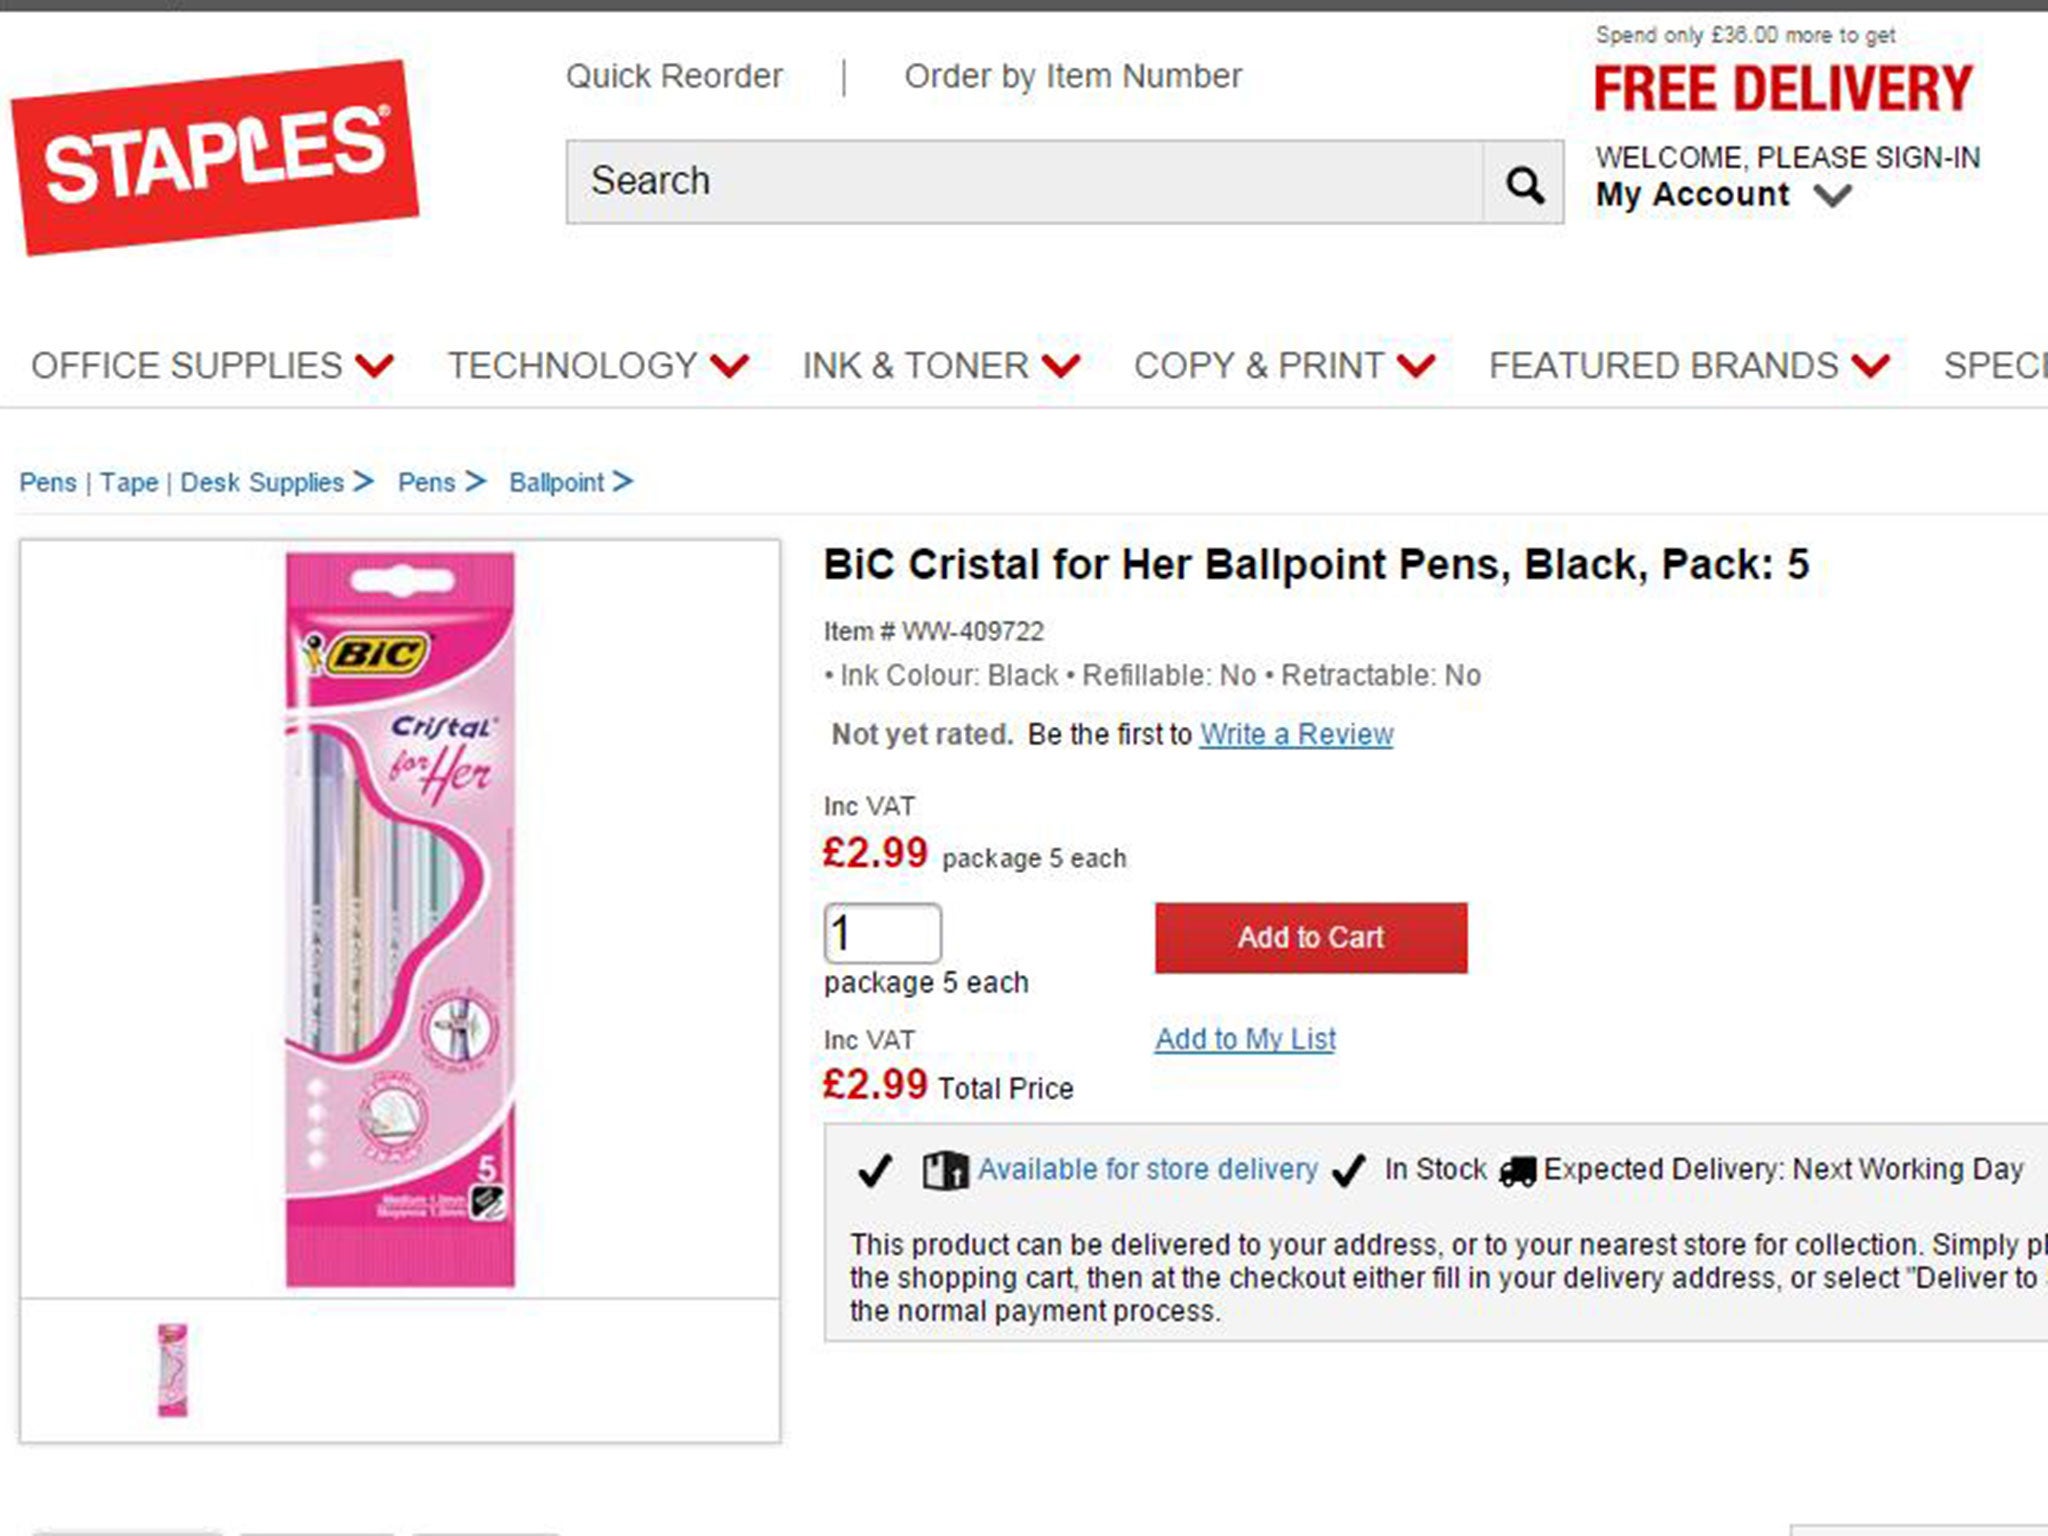 Bic's 'For Her' pens cost a third more than the same product in blue or black at Staples